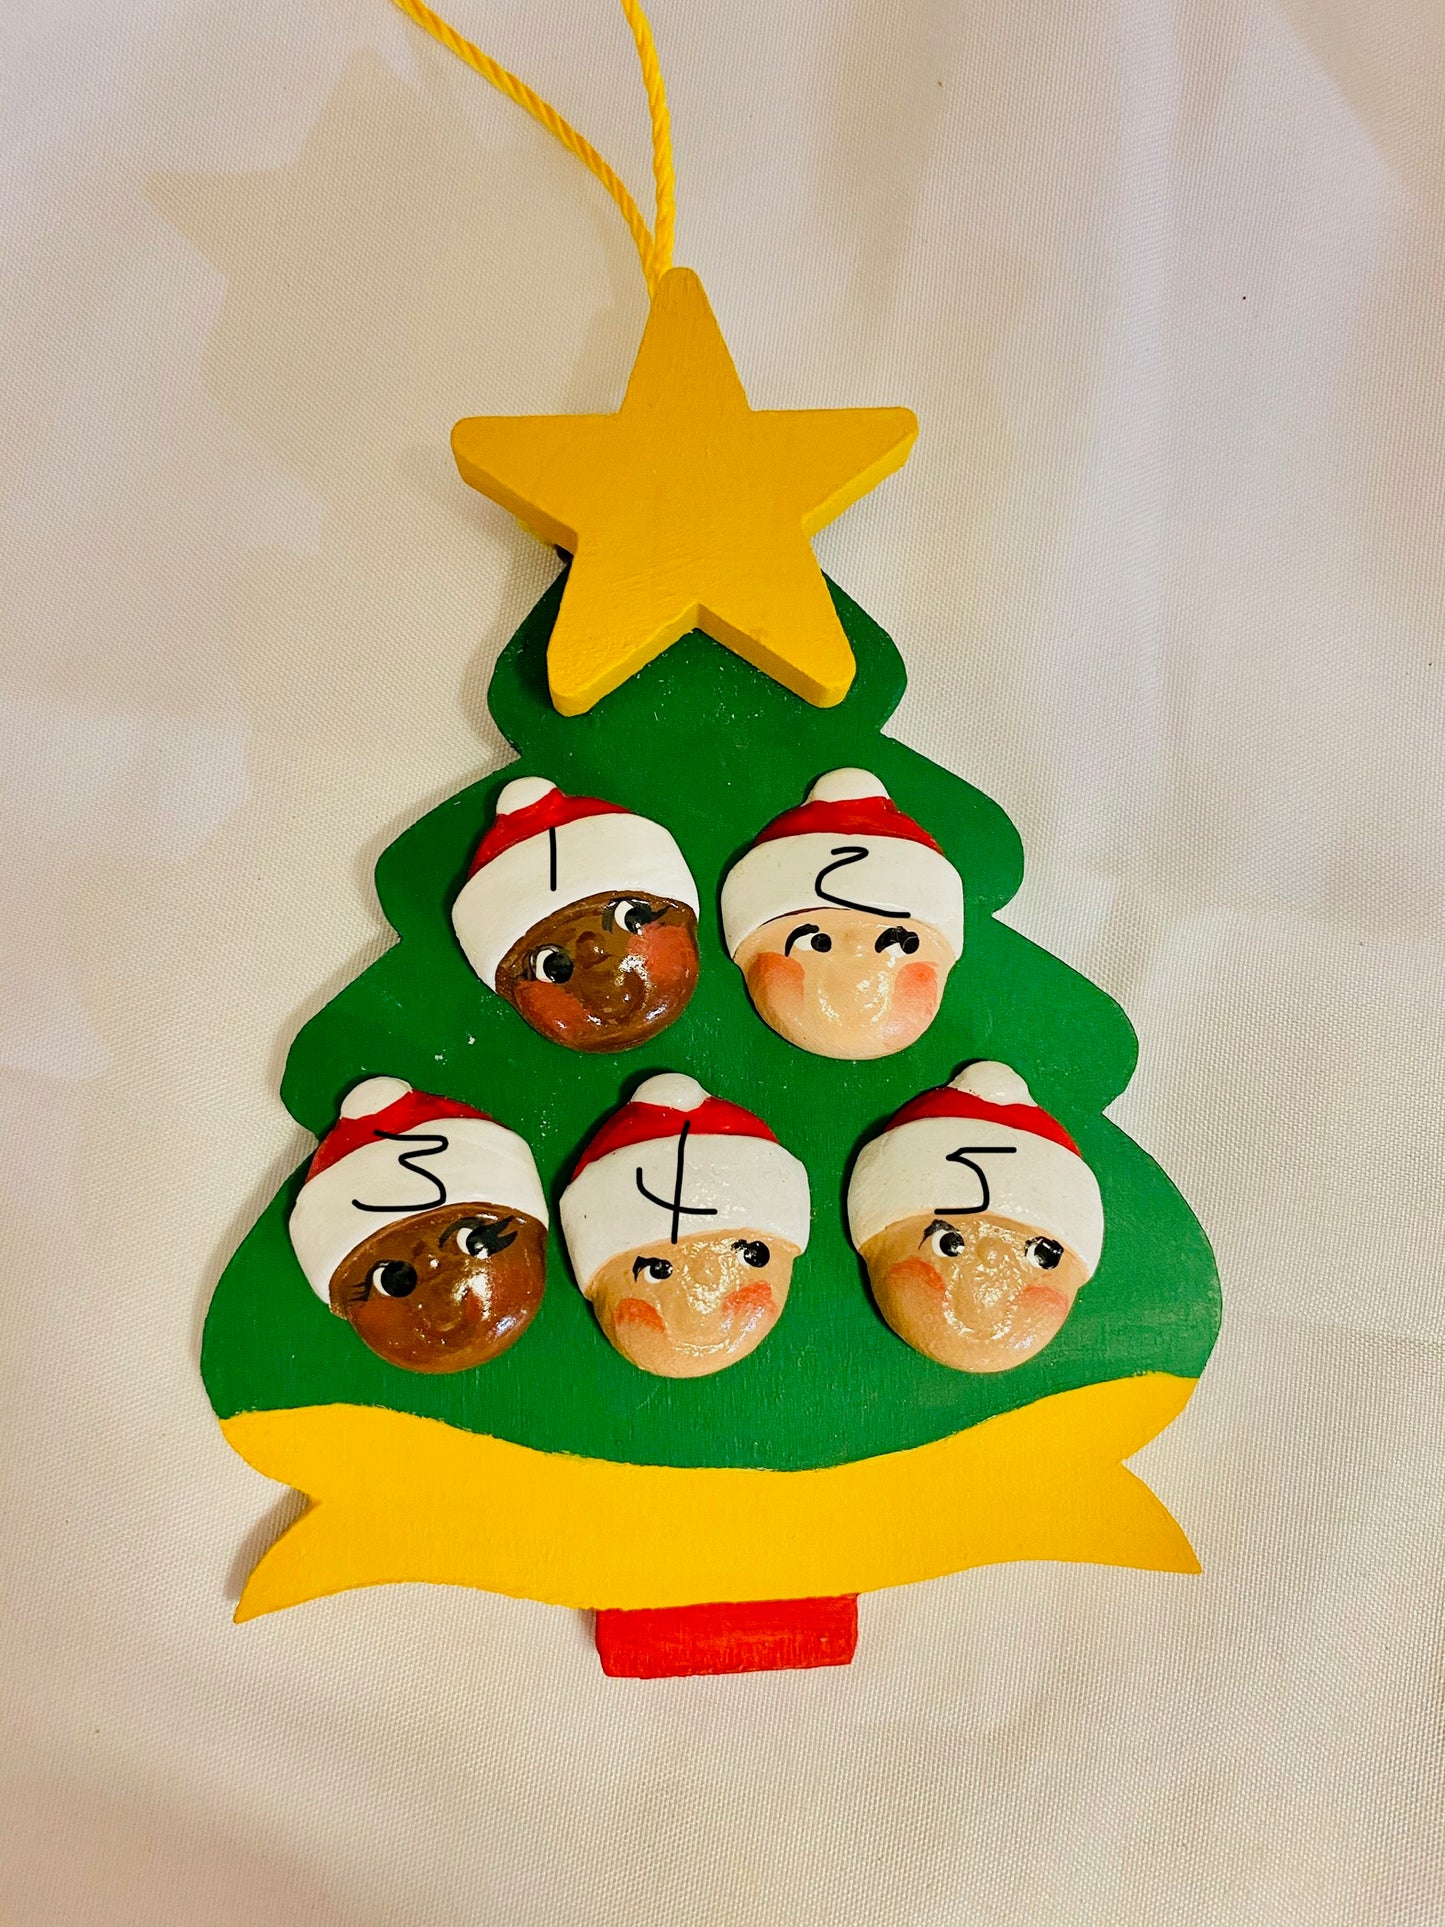 Personalized Ornament 5 Santa Faces on a Christmas Tree  4.5" 3.5"